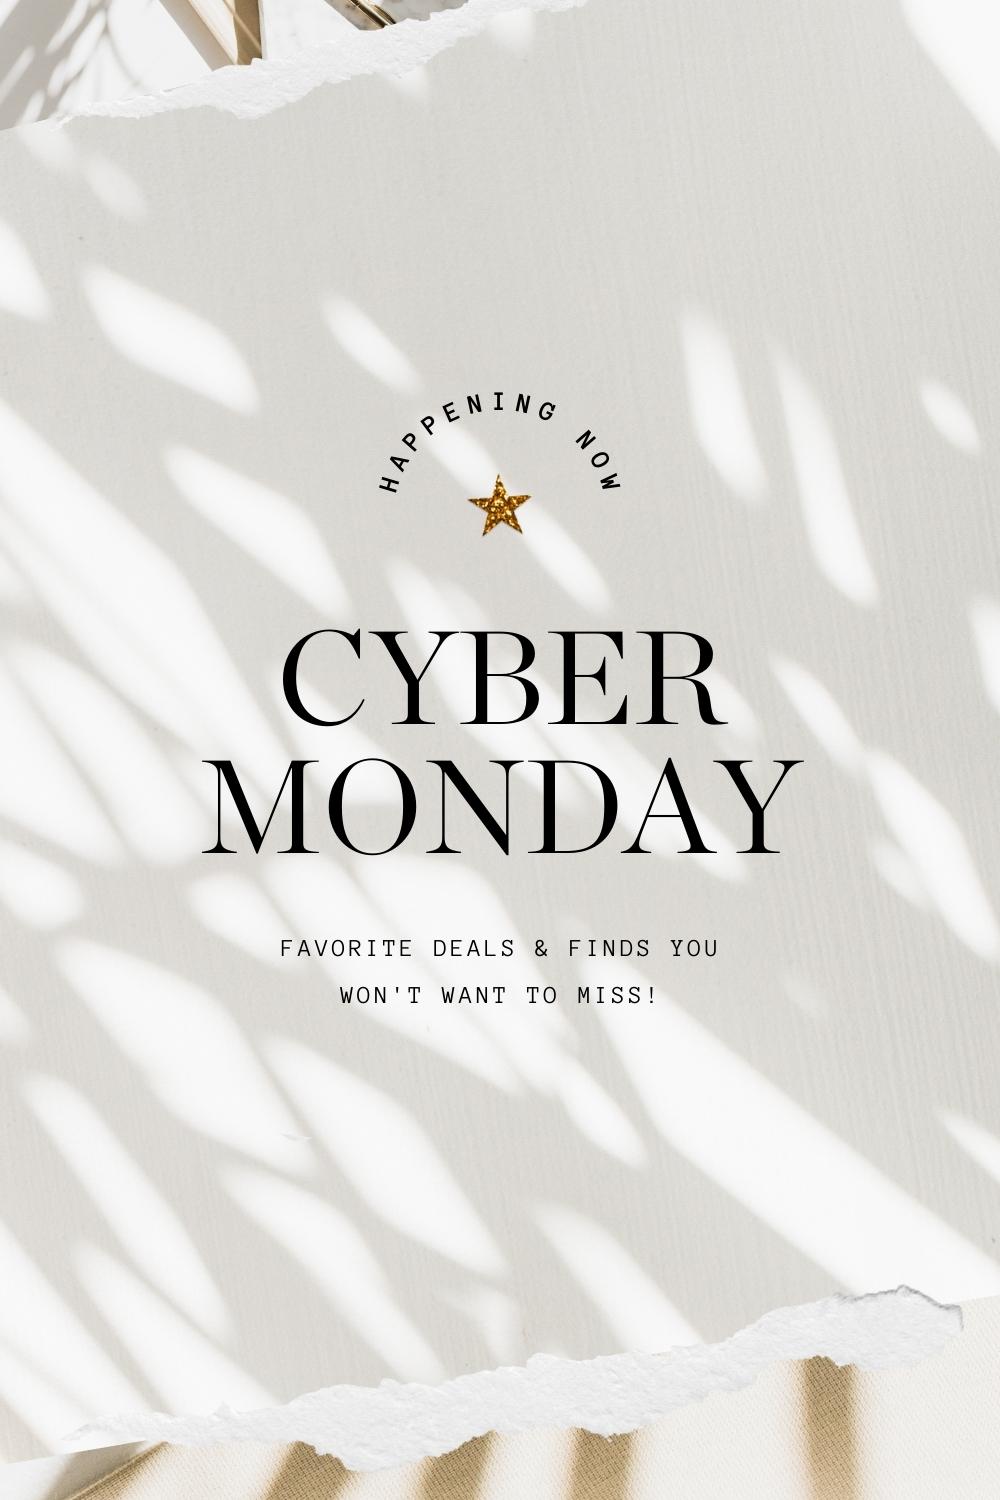 The best Cyber Monday deals all in one spot!